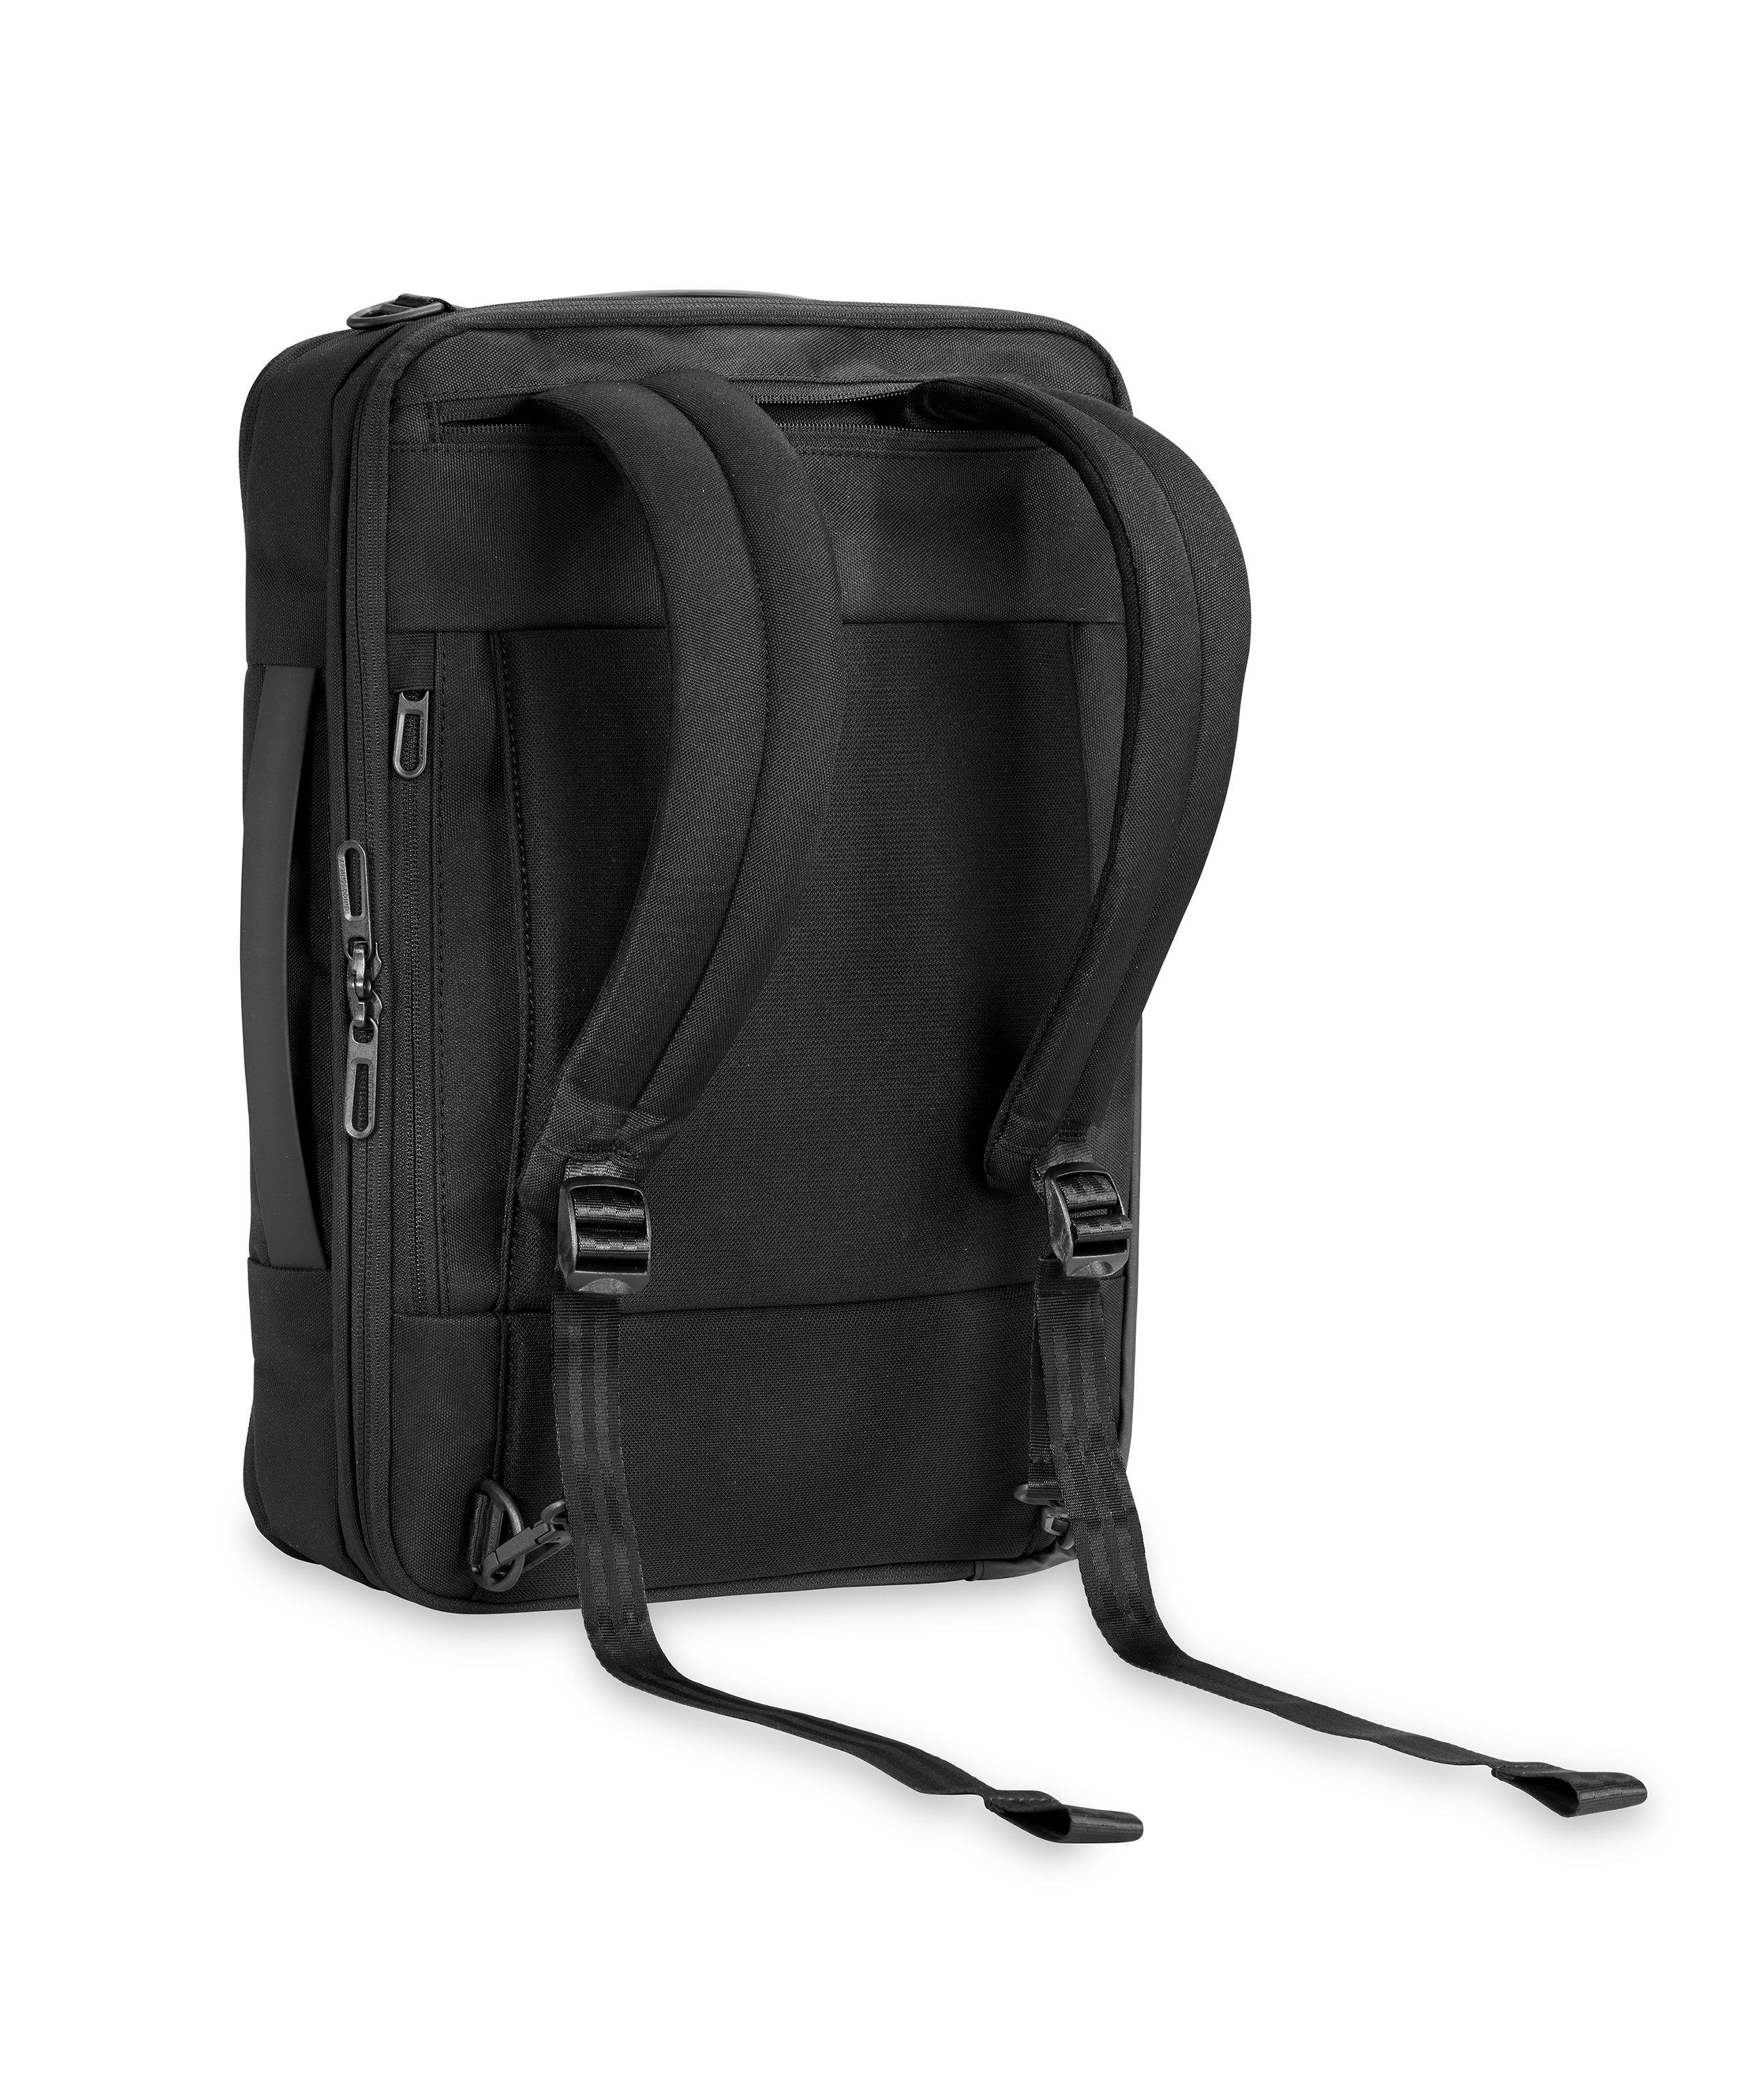 Convertible Brief - Backpack image 3